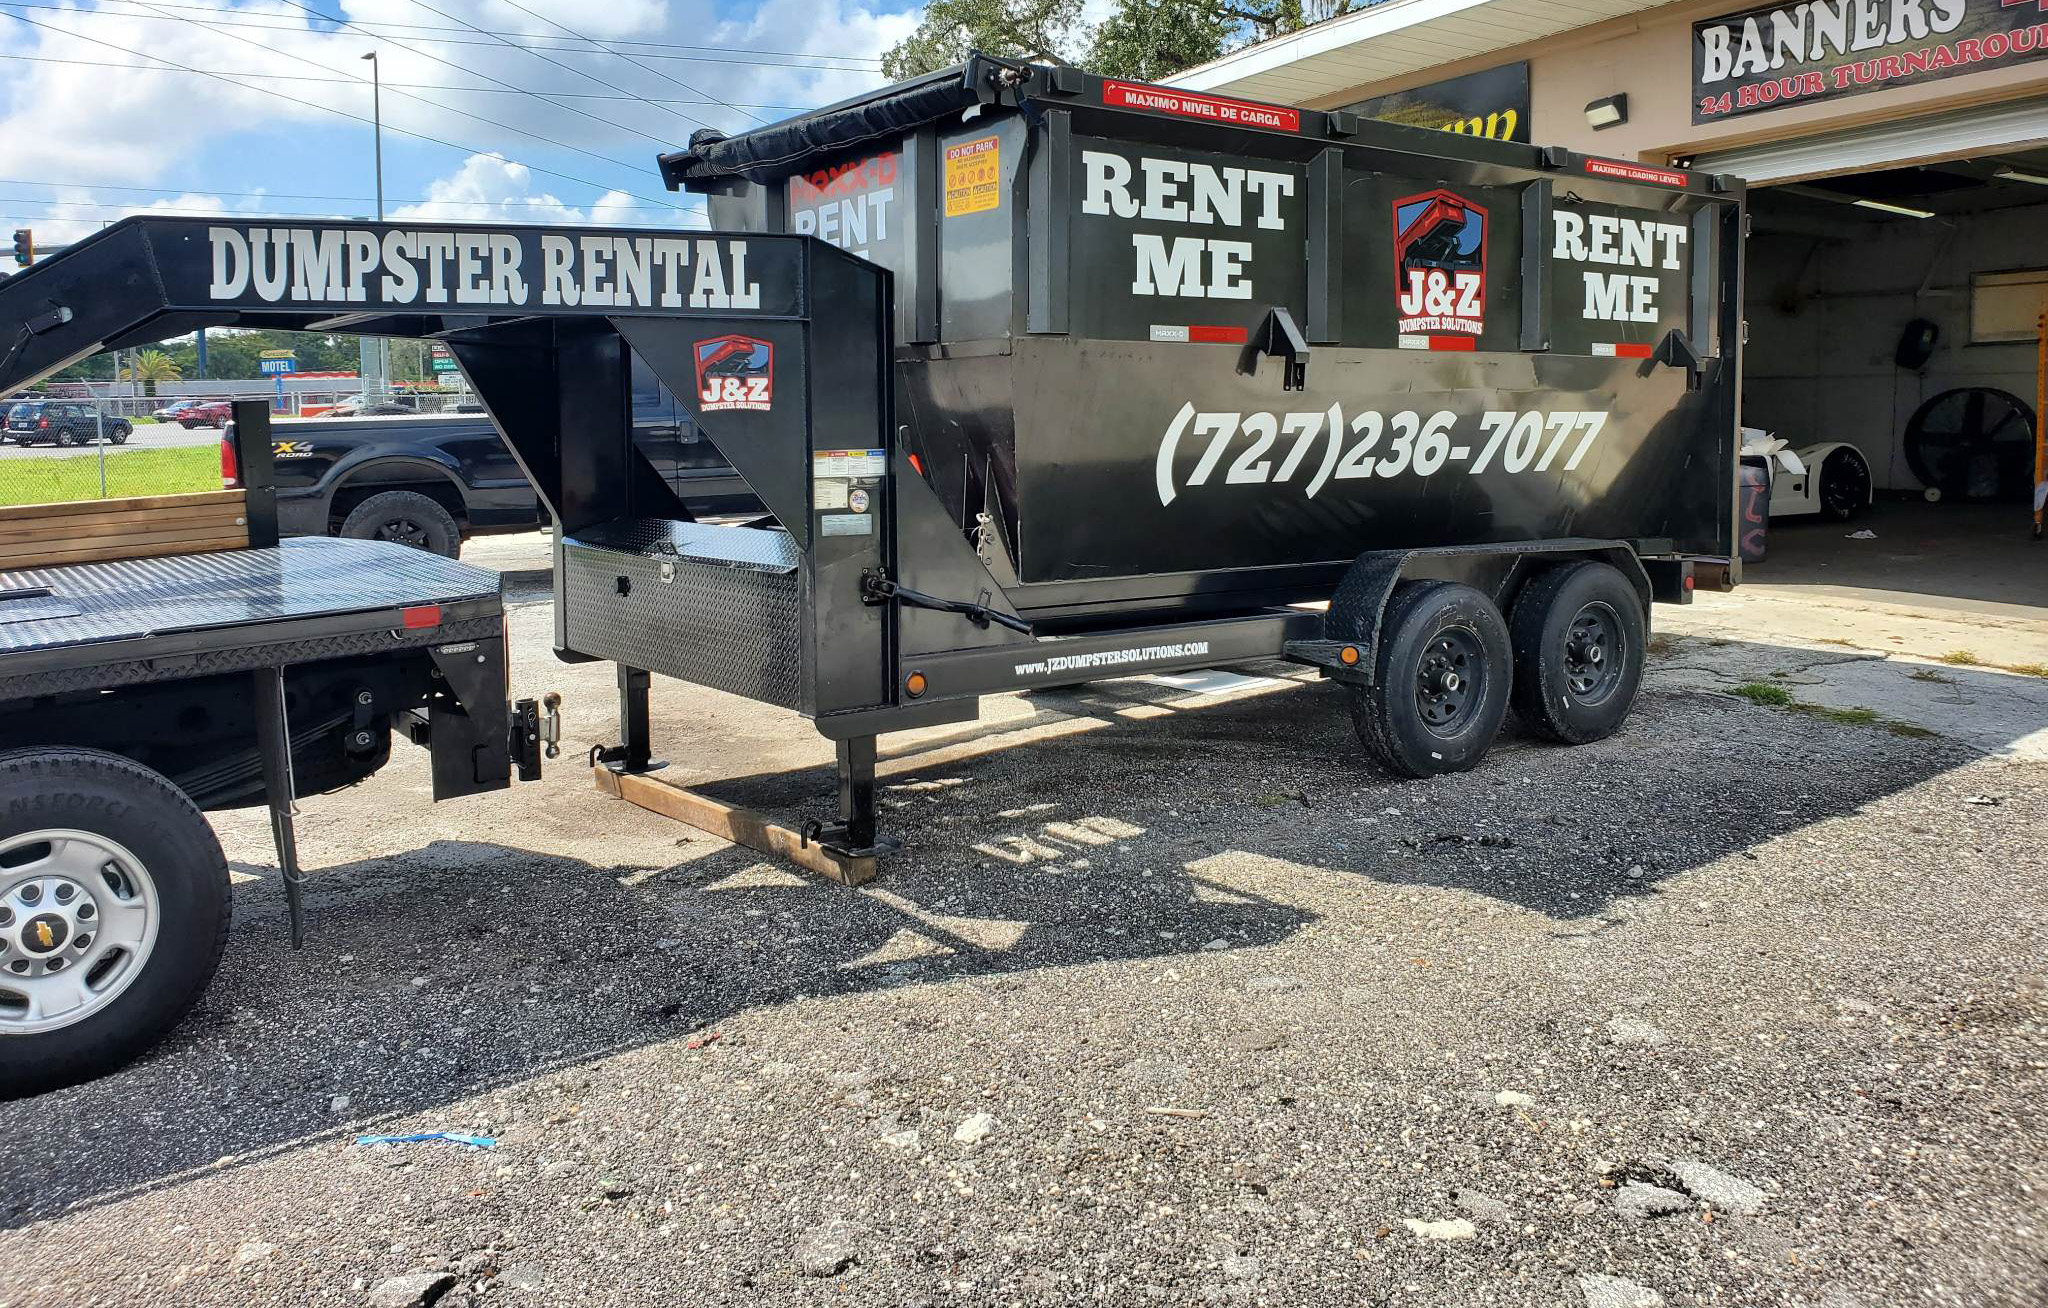 Residential Dumpster Rental Tarpon Springs FL Homeowners Use for Renovations and Cleanouts